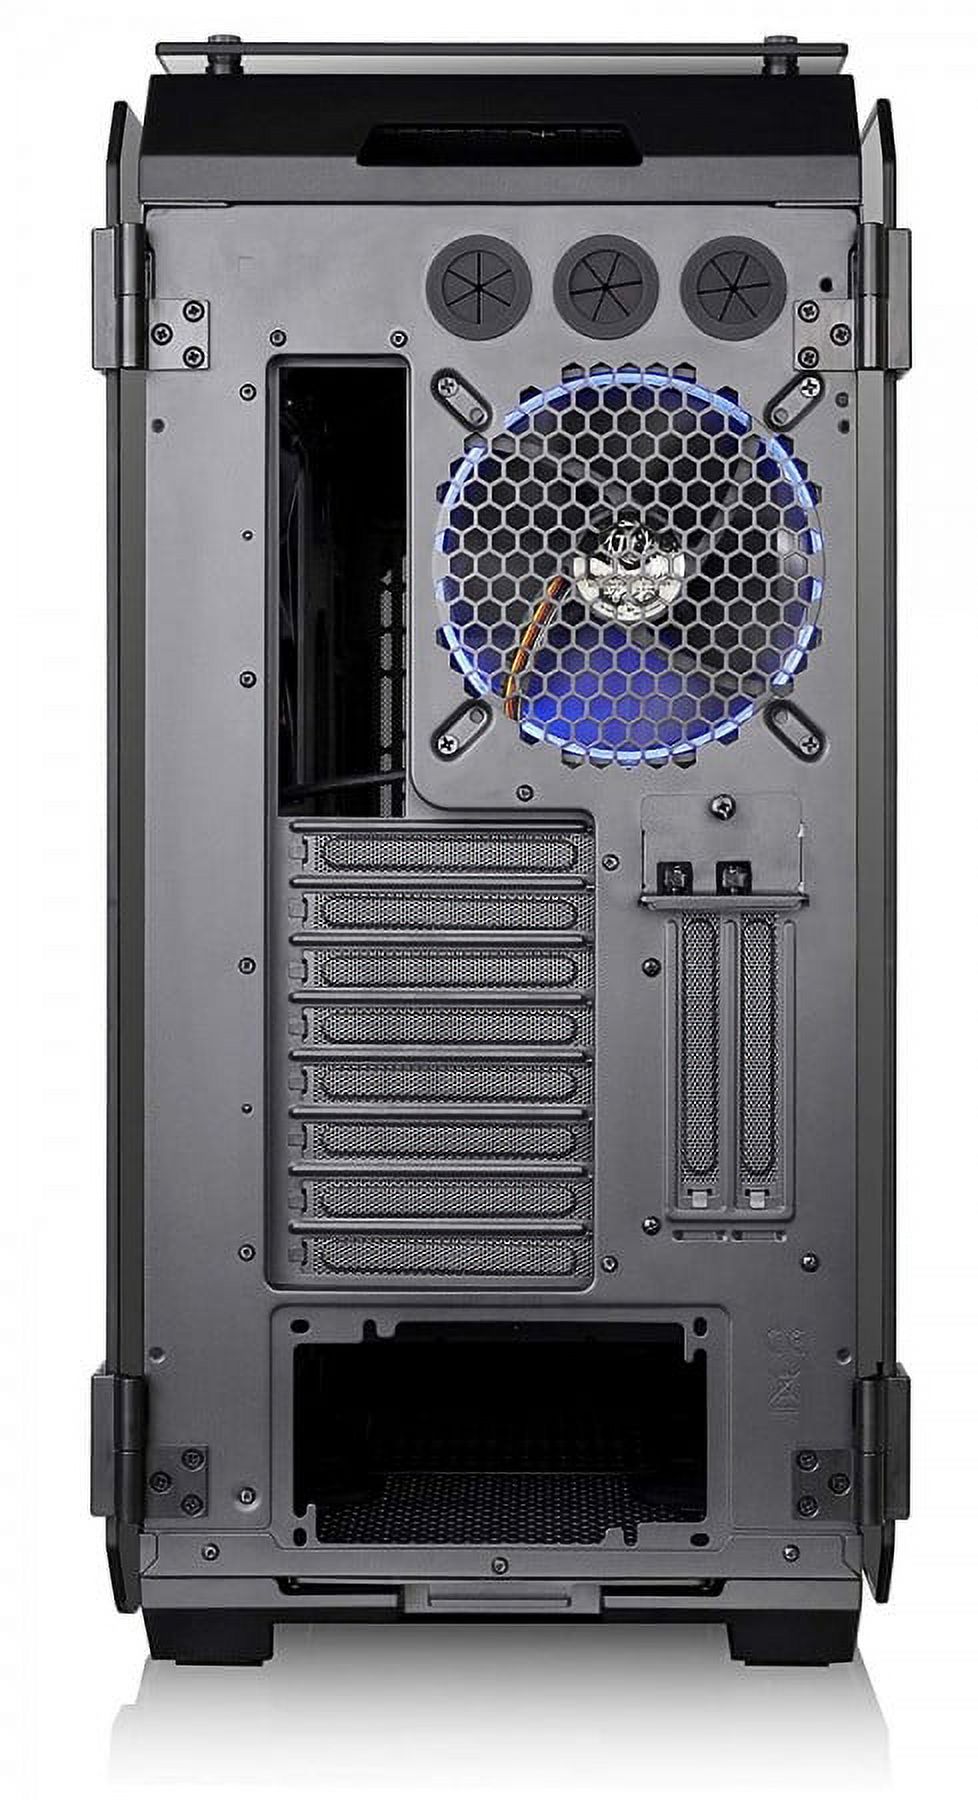 Thermaltake View 71 E-ATX Full Tower Computer Case - Black. - image 4 of 5